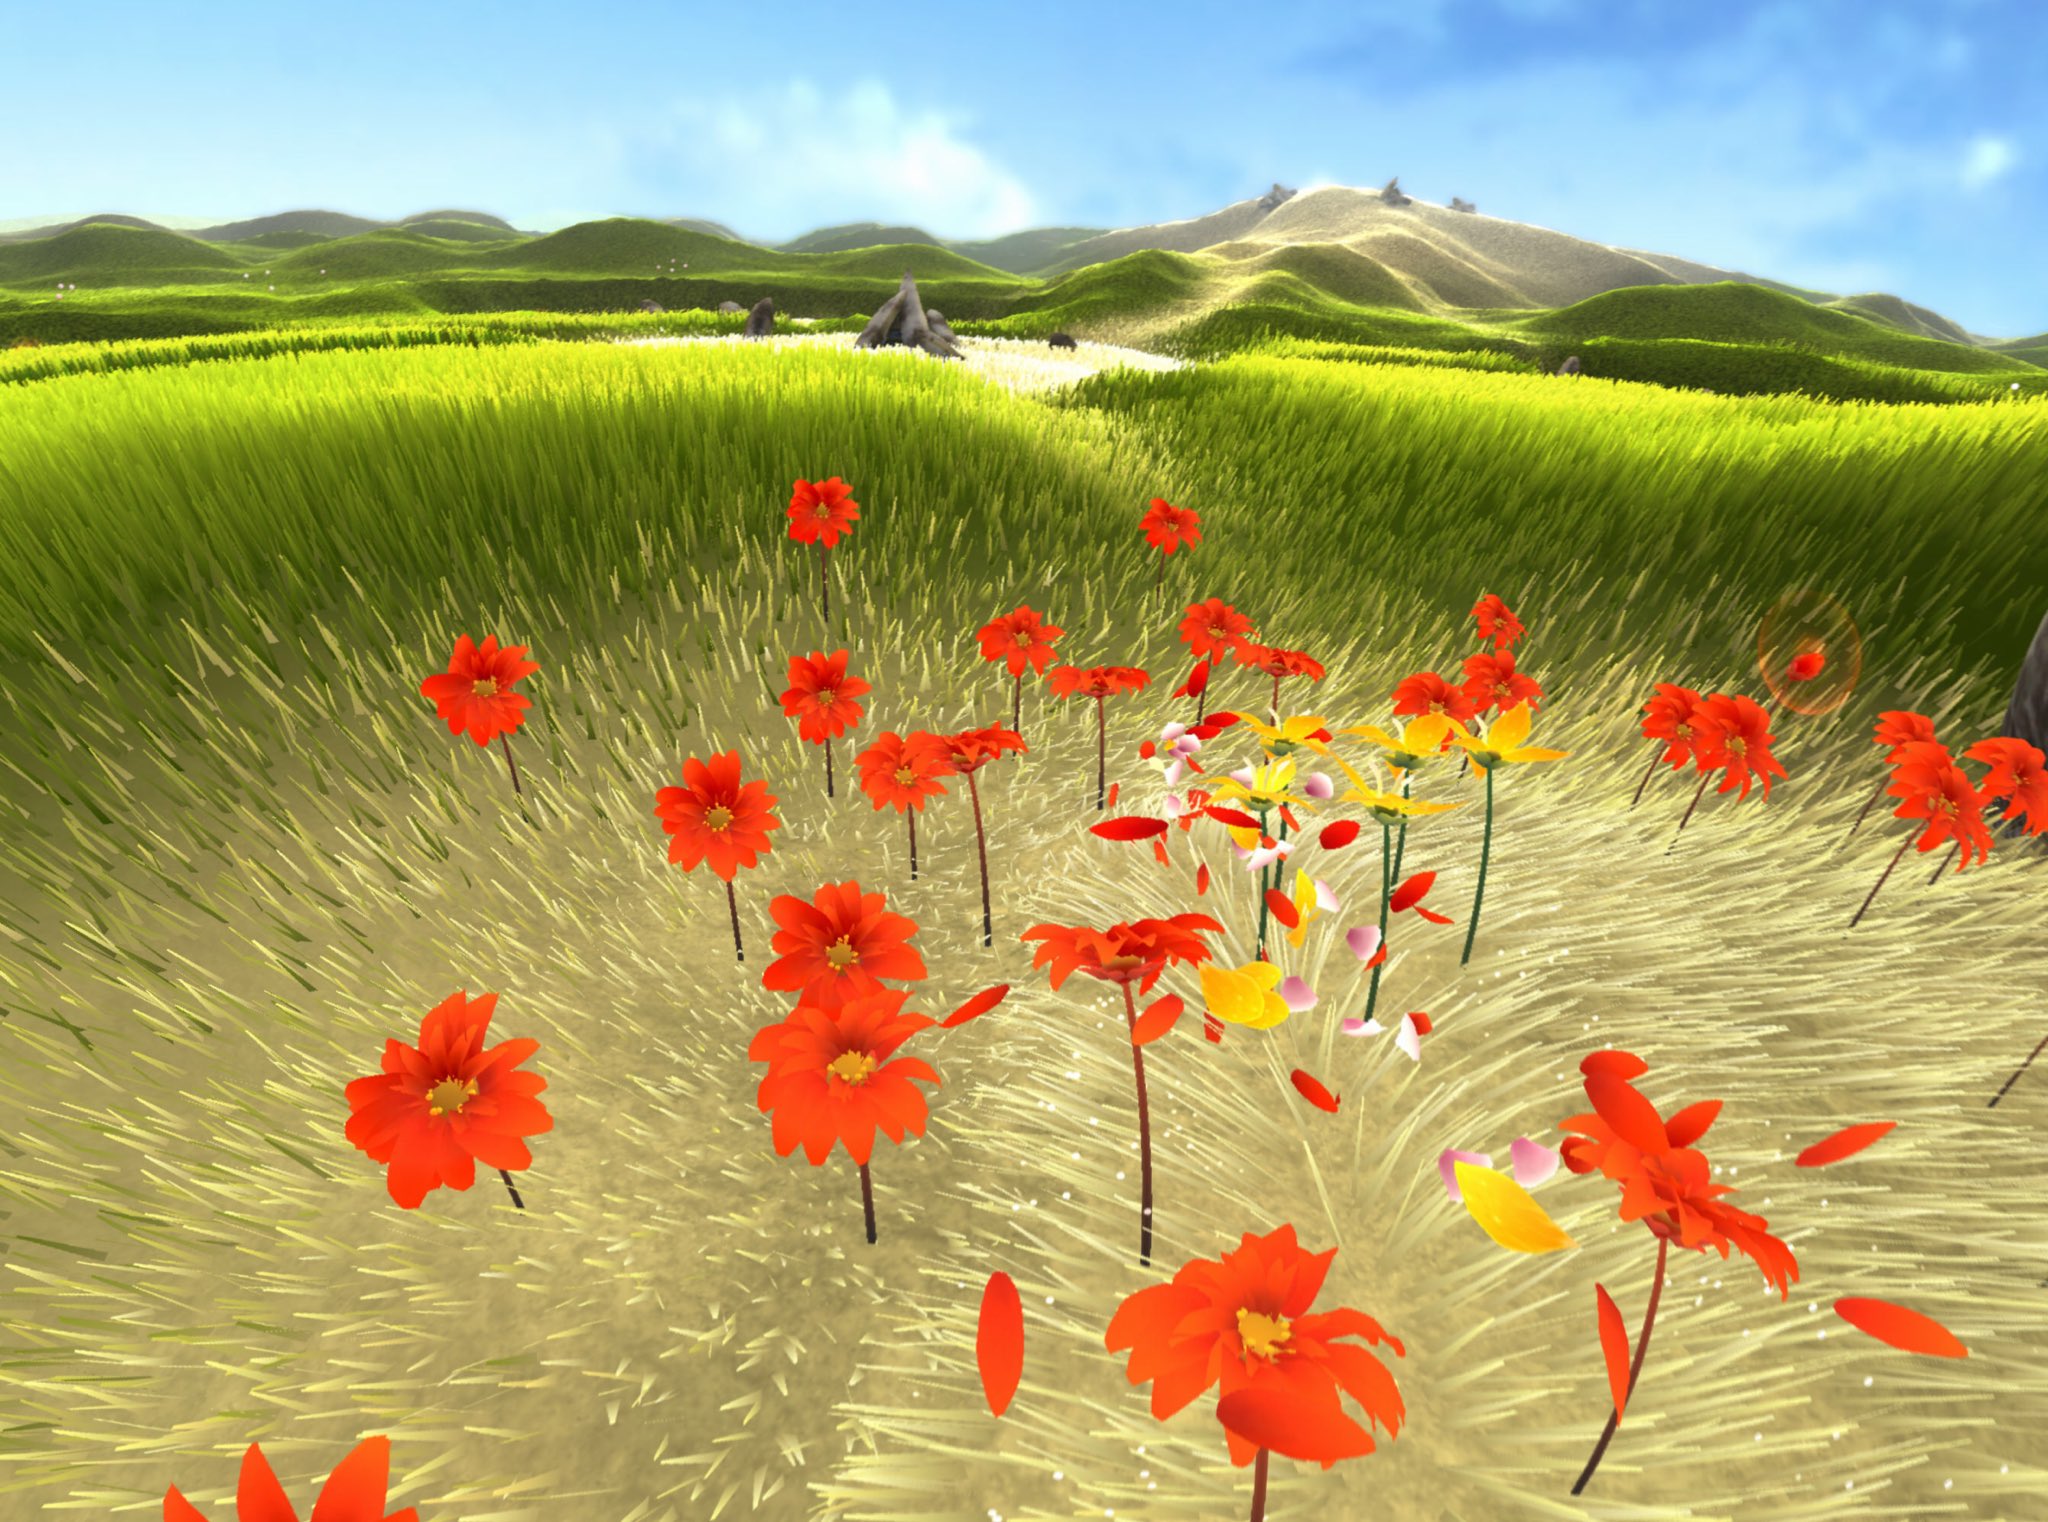 Ripples Lappe Lager Matt Nava on Twitter: "The first game I ever worked on, Flower by  @thatgamecompany is now on iOS! Please enjoy it! 🌼🌸🌷🌺🥀🌻  https://t.co/00RjLralY3 https://t.co/ECX3pLGxxC" / Twitter